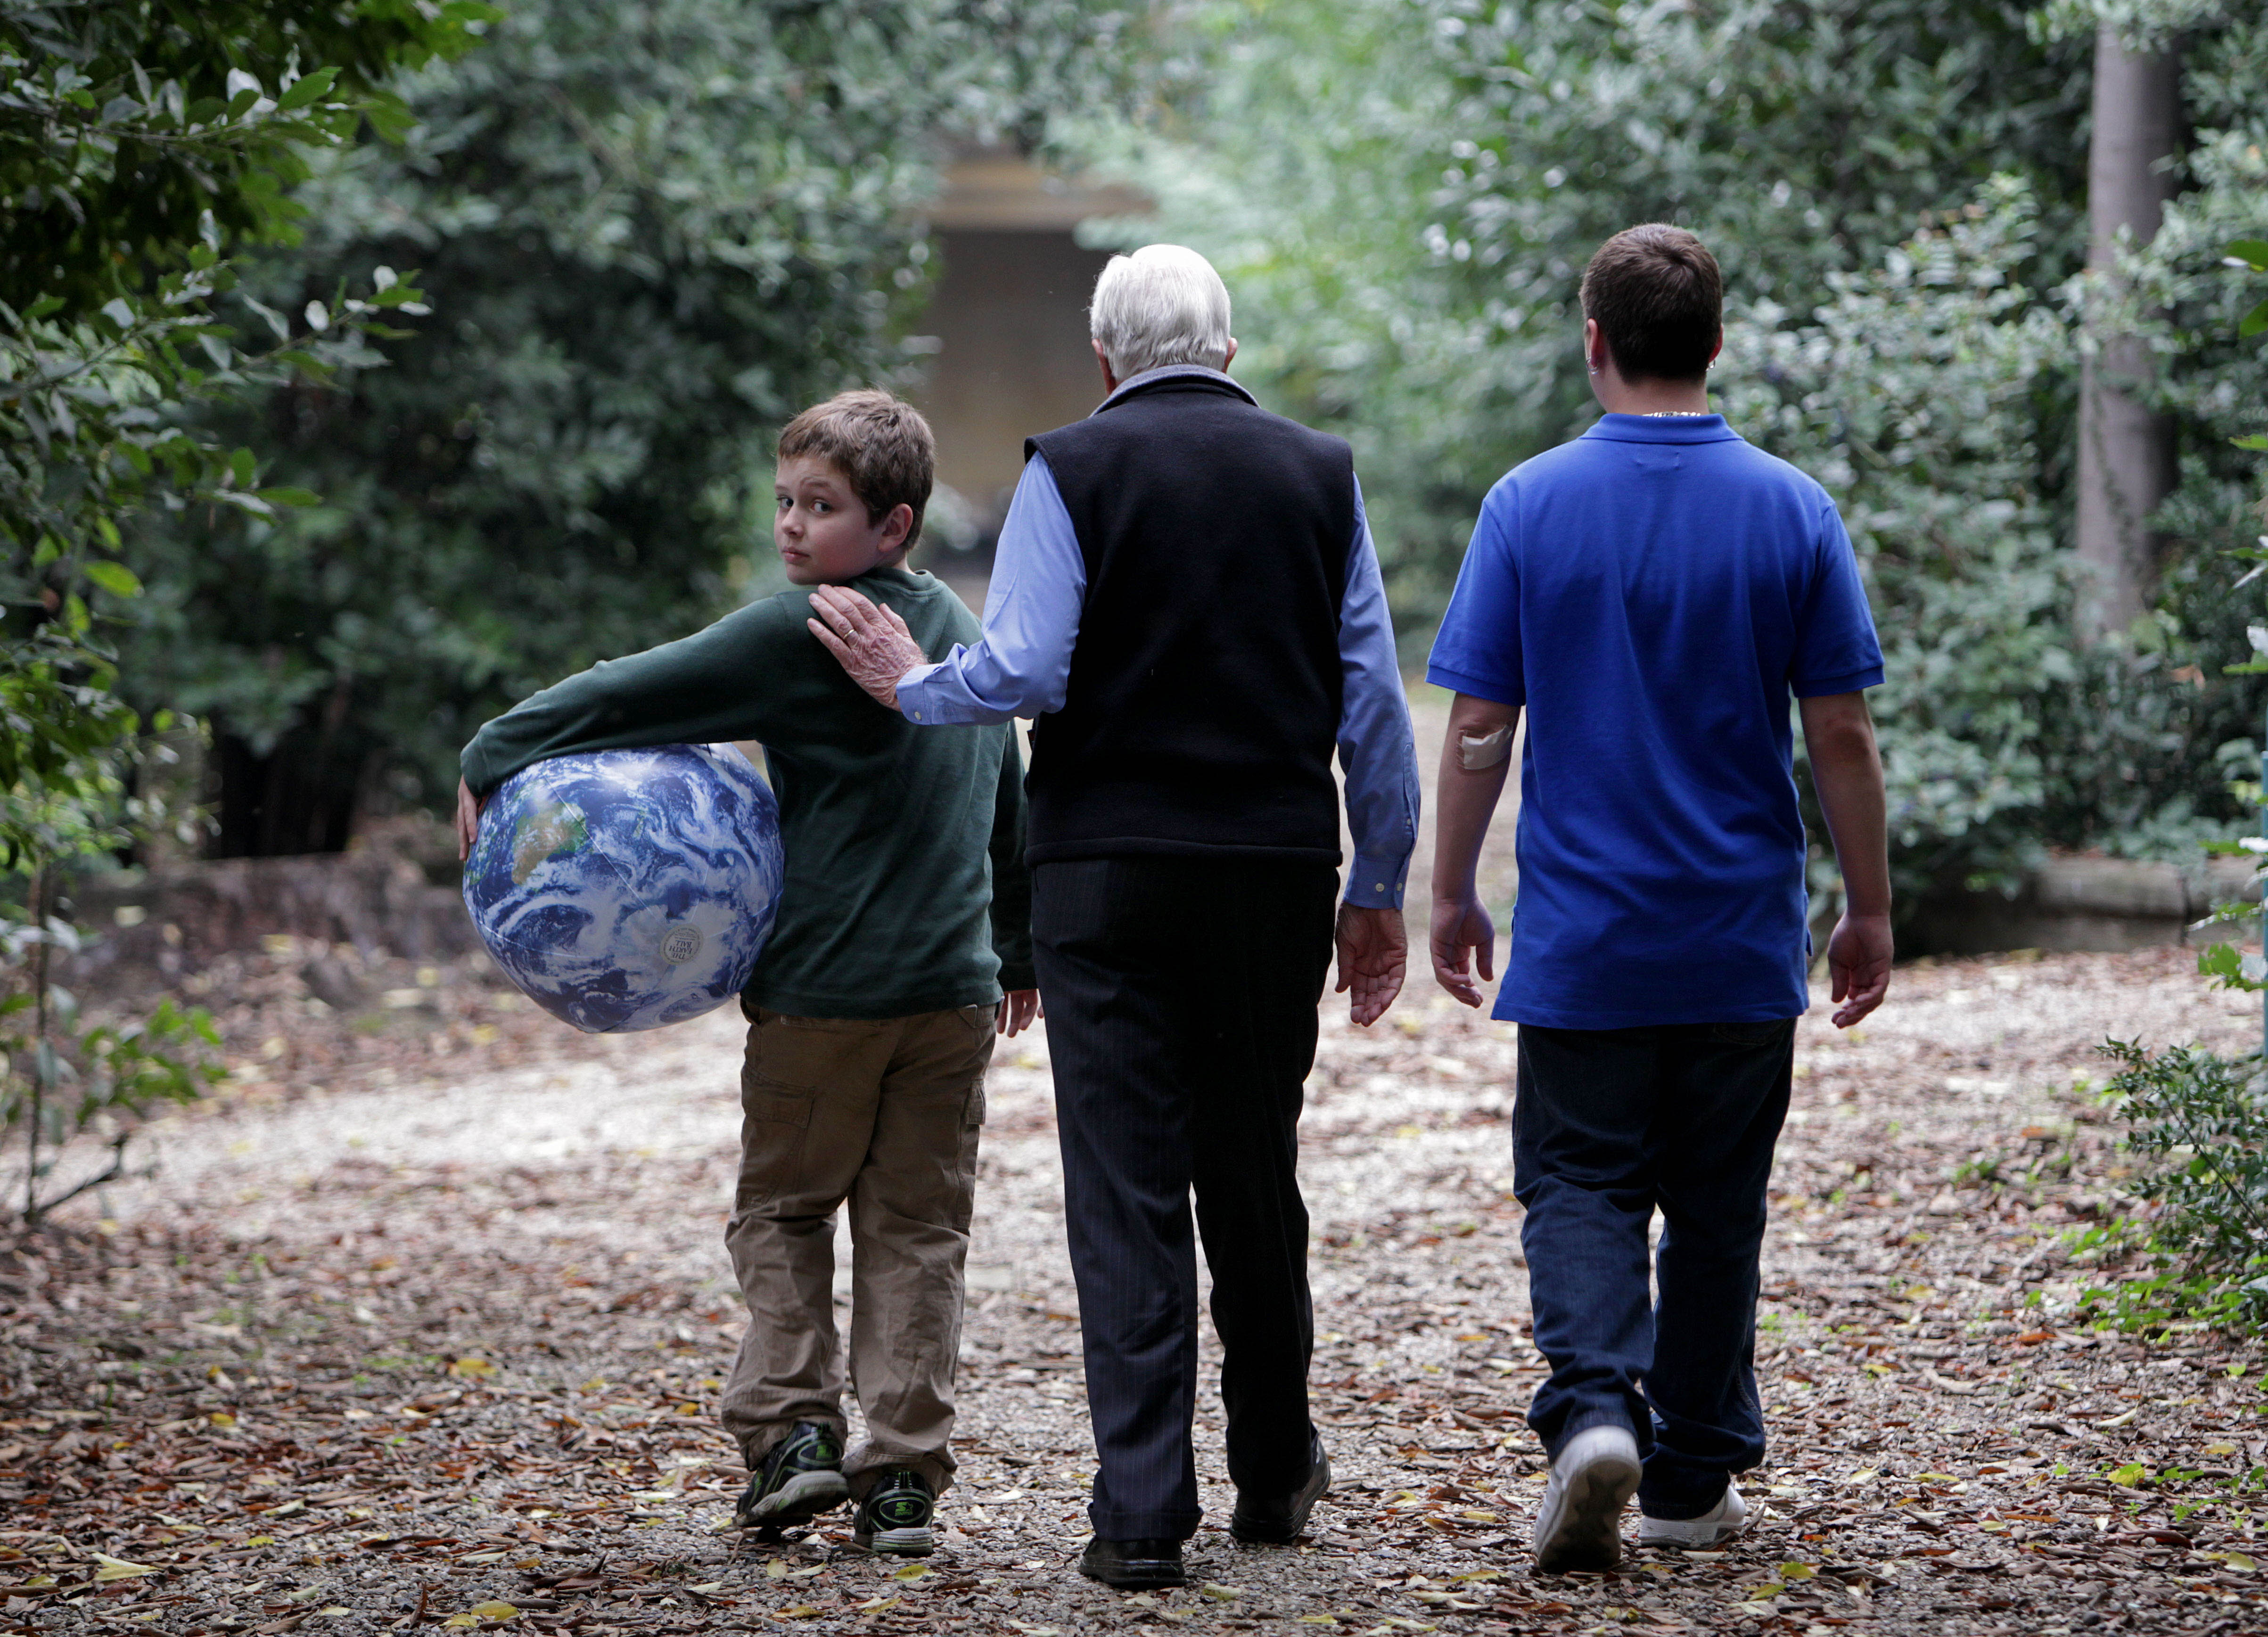 Jimmy Carter walks with grandsons Jeremy Carter and Hugo Wentzel, during a picnic event in Istanbul, Turkey, on October 31, 2009. | Source: Getty Images